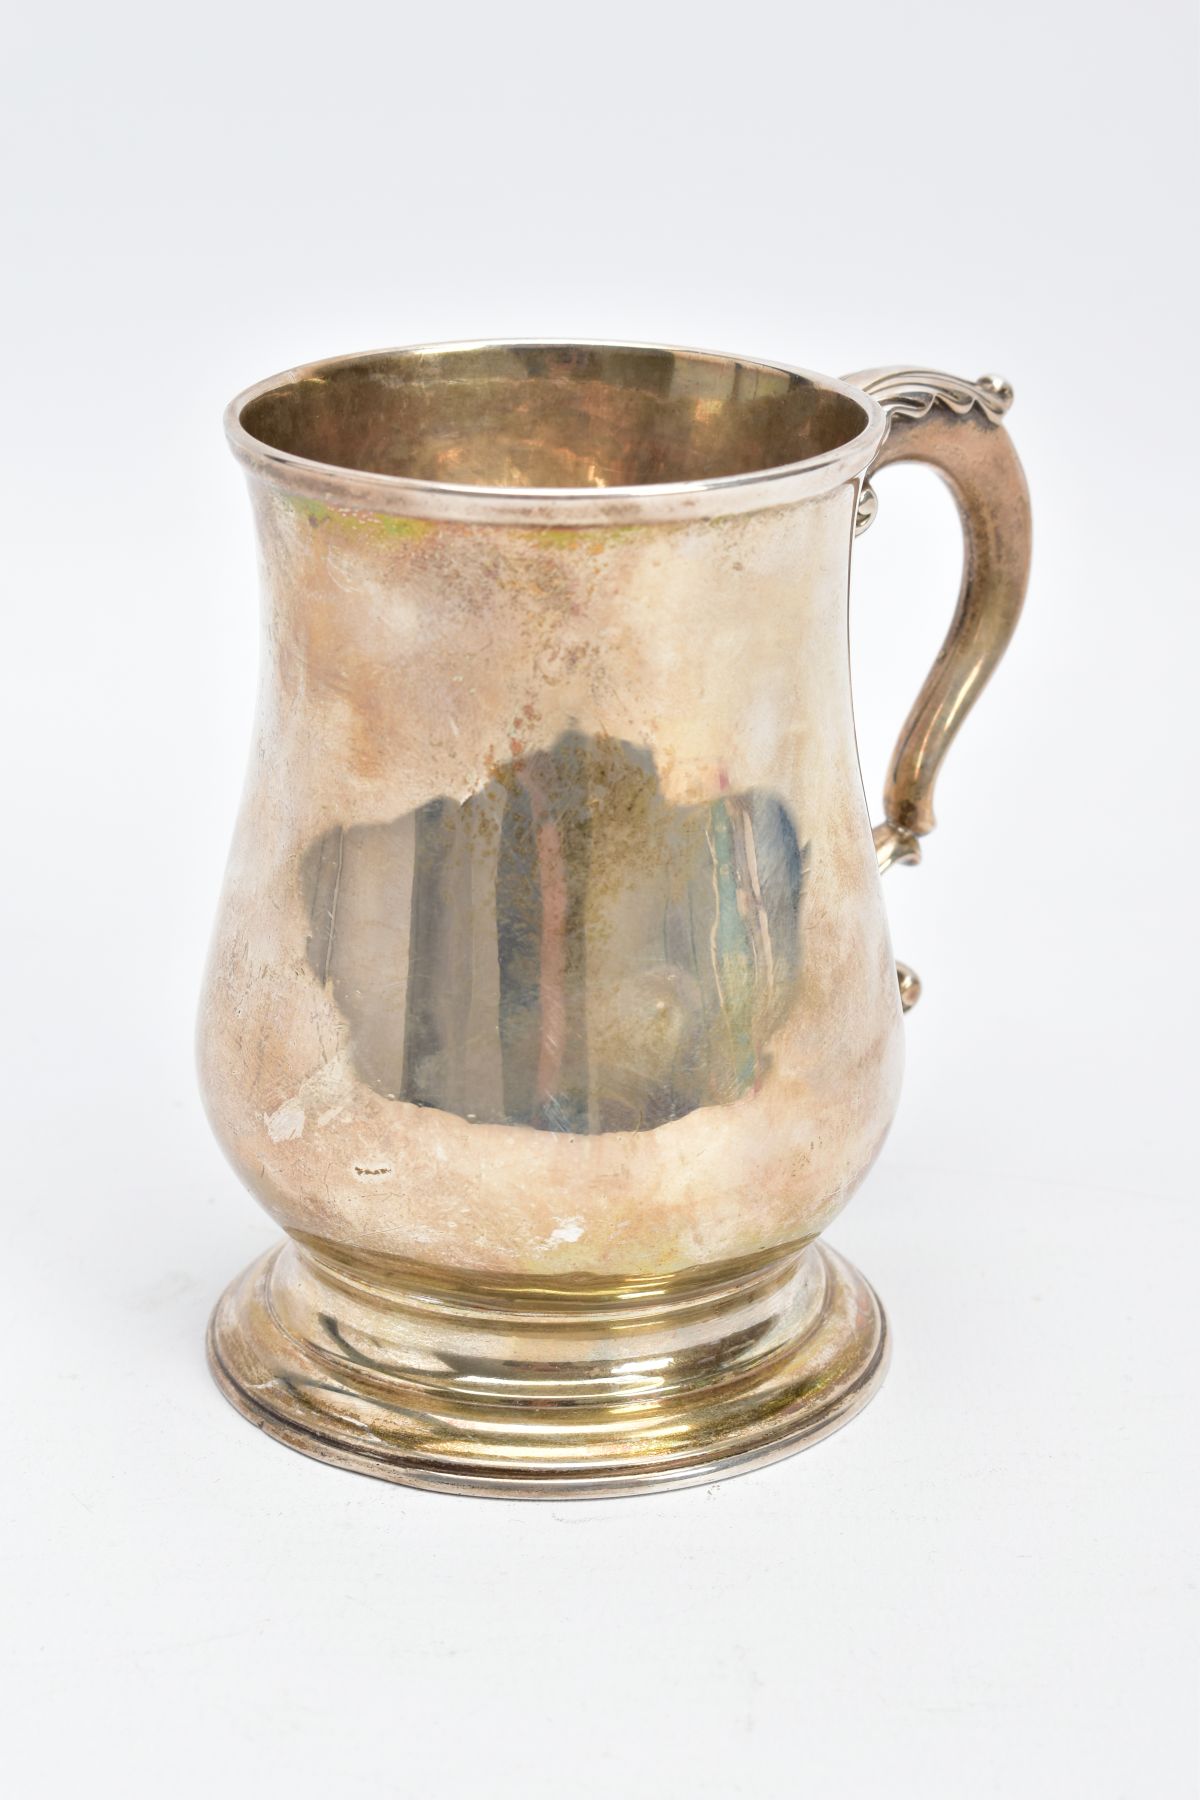 A SILVER GEORGE III TANKARD, of a plain polished design, bell shaped body on a circular base with - Image 2 of 6